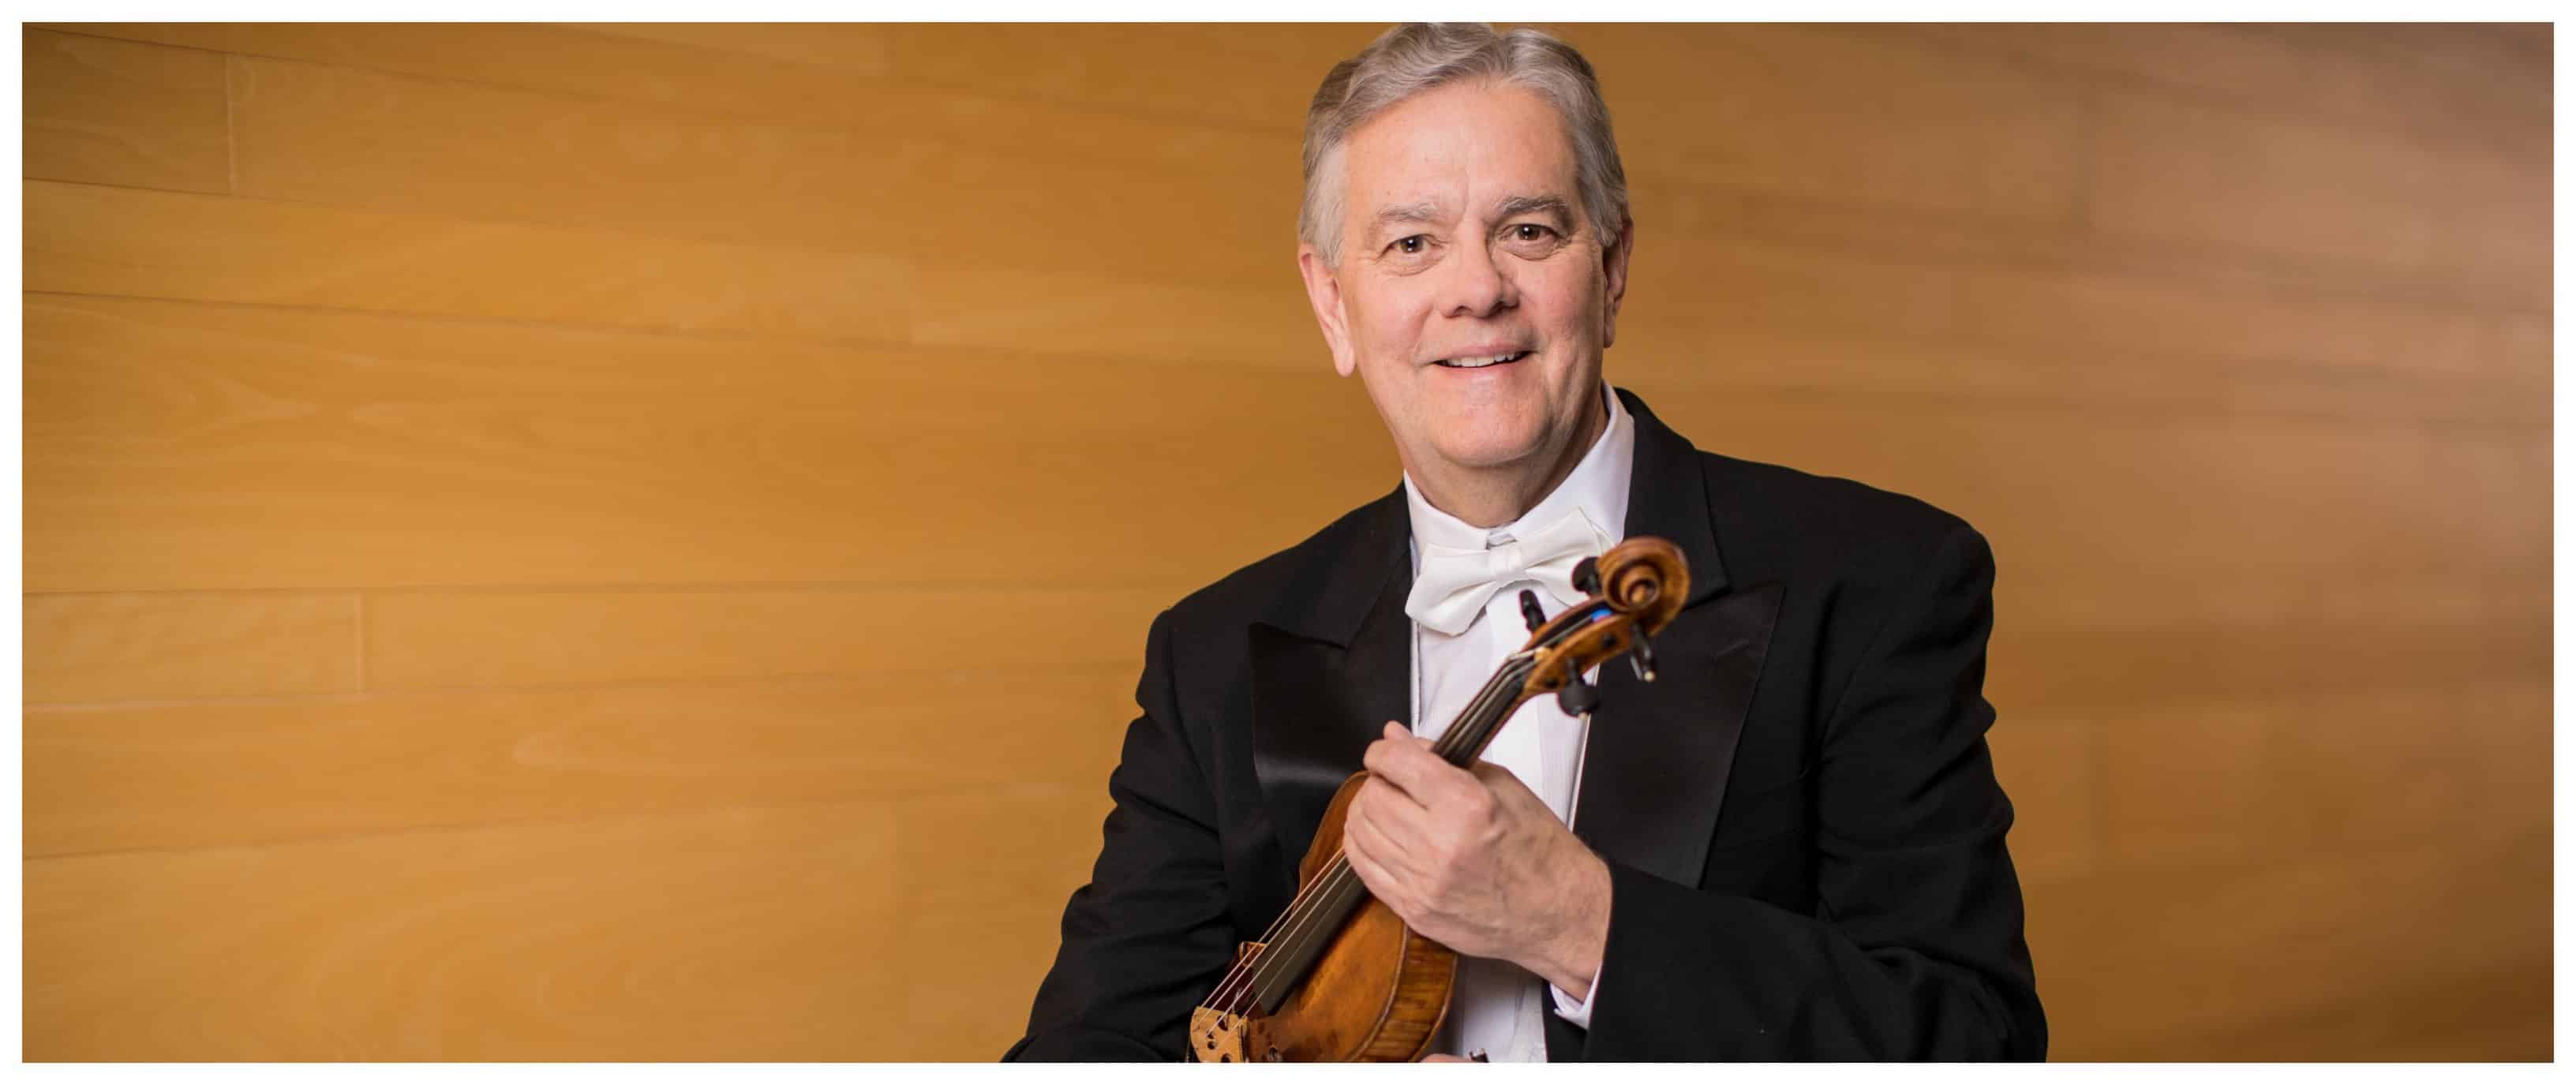 Concertmaster lays down bow after 40 years